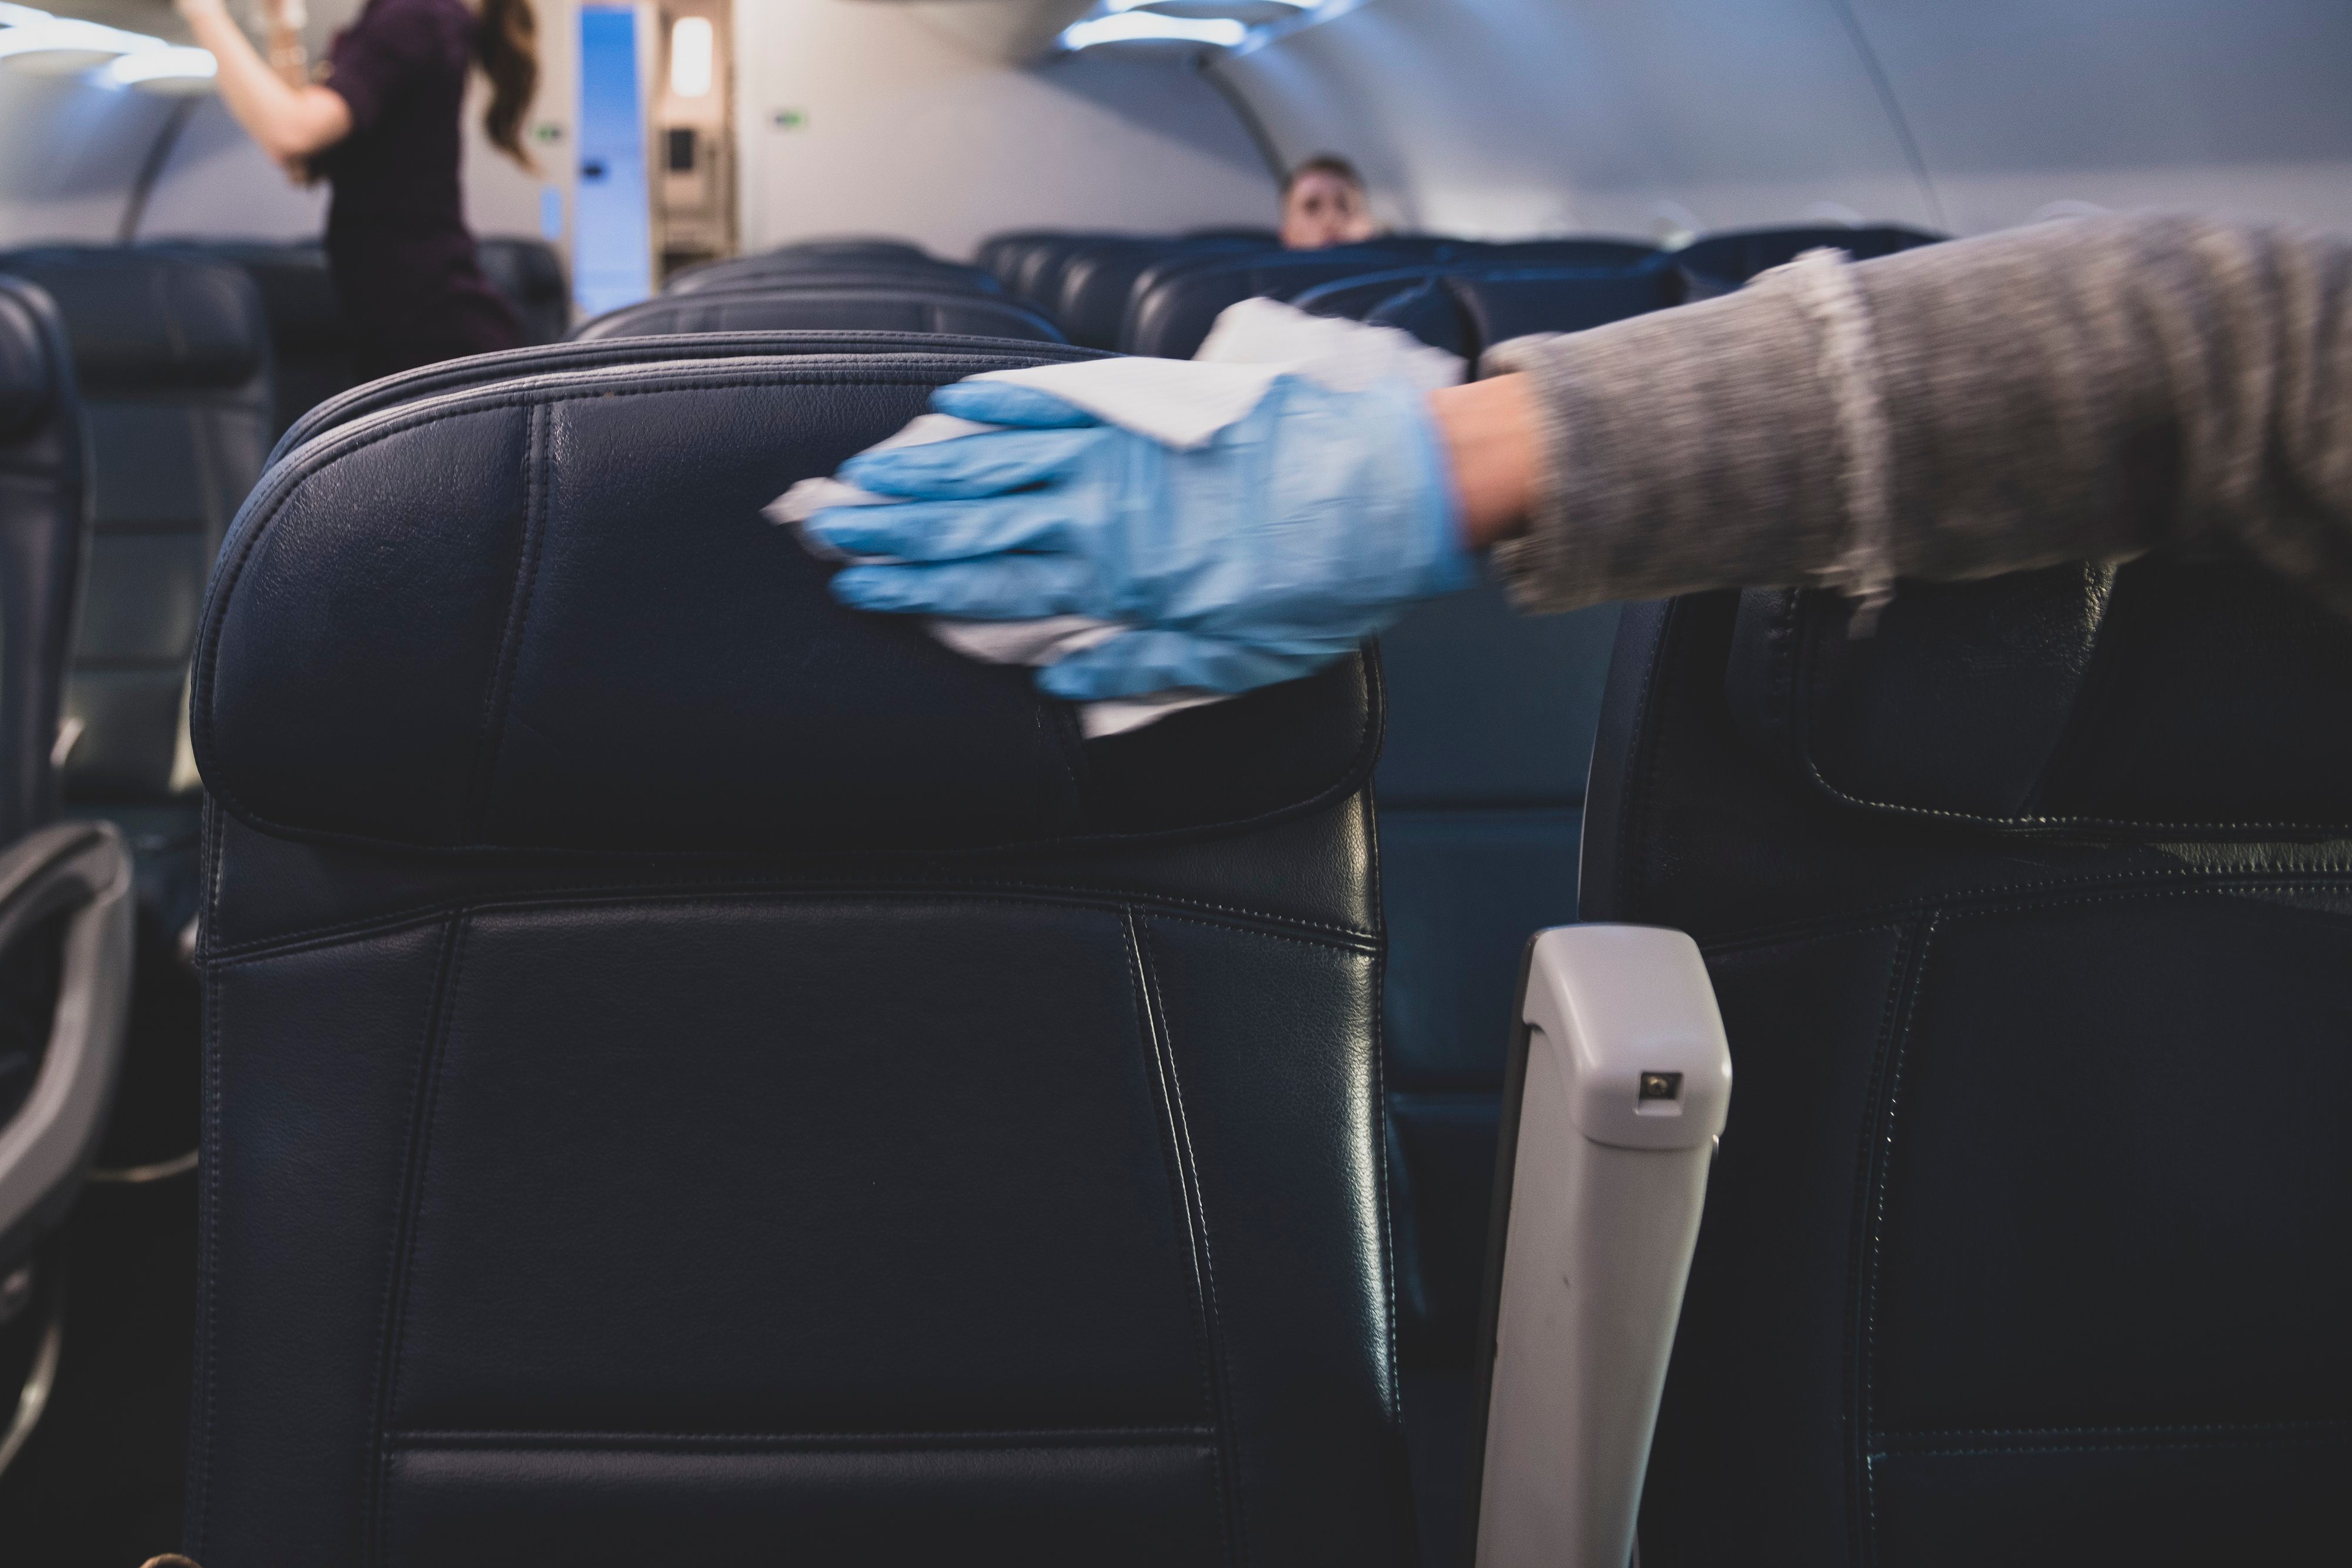 Passenger disinfecting airplane seats after boarding flight